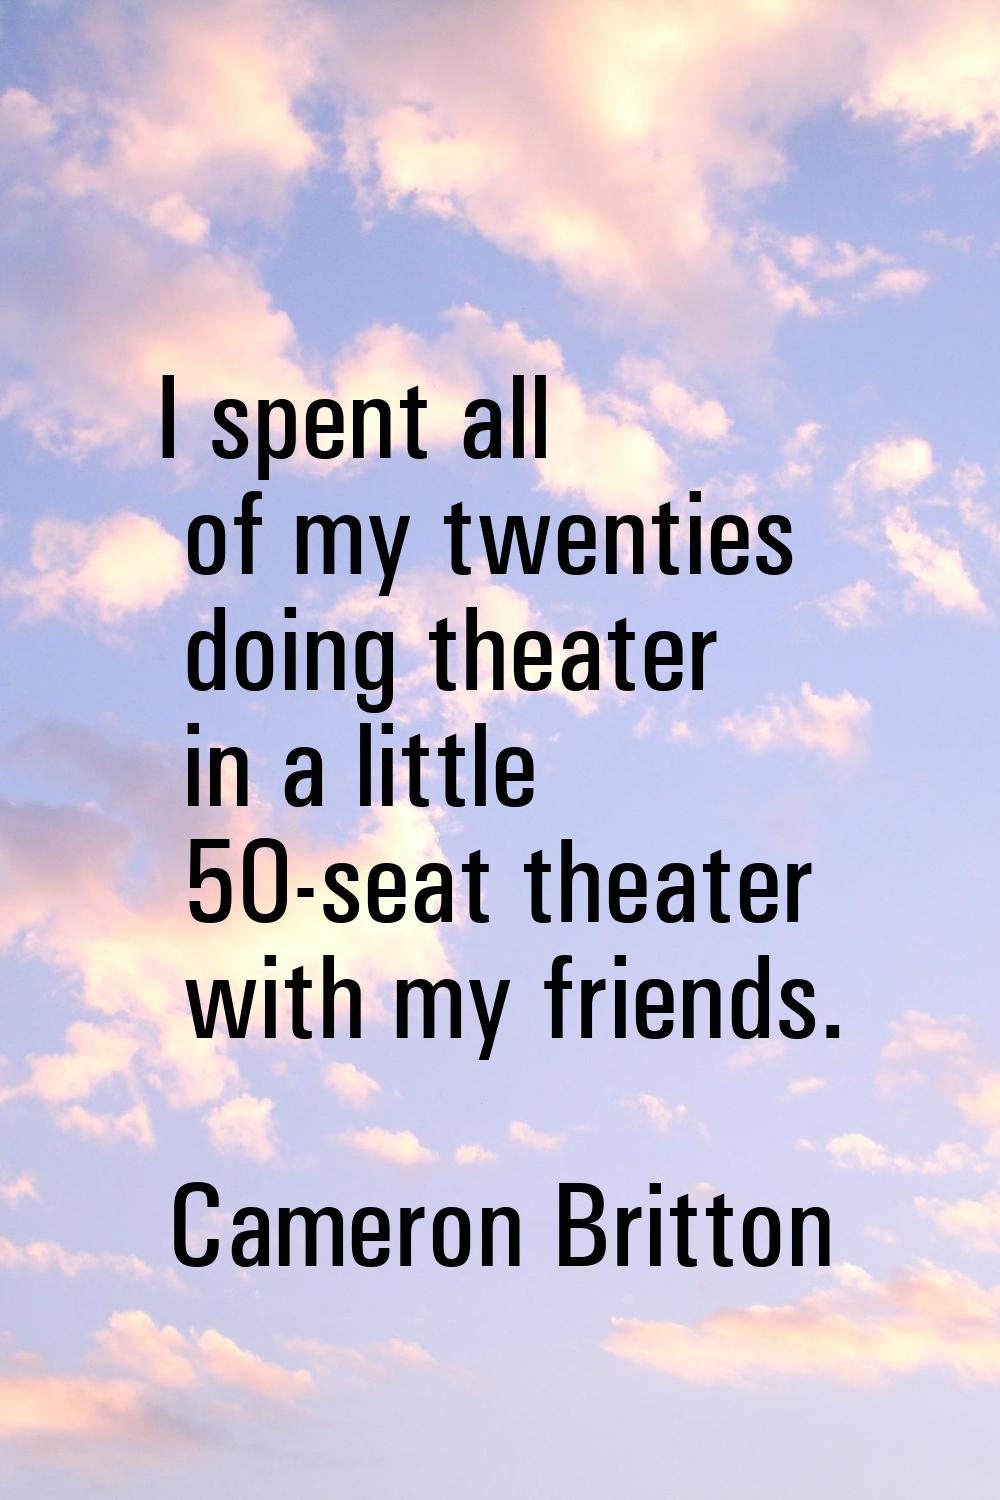 I spent all of my twenties doing theater in a little 50-seat theater with my friends.